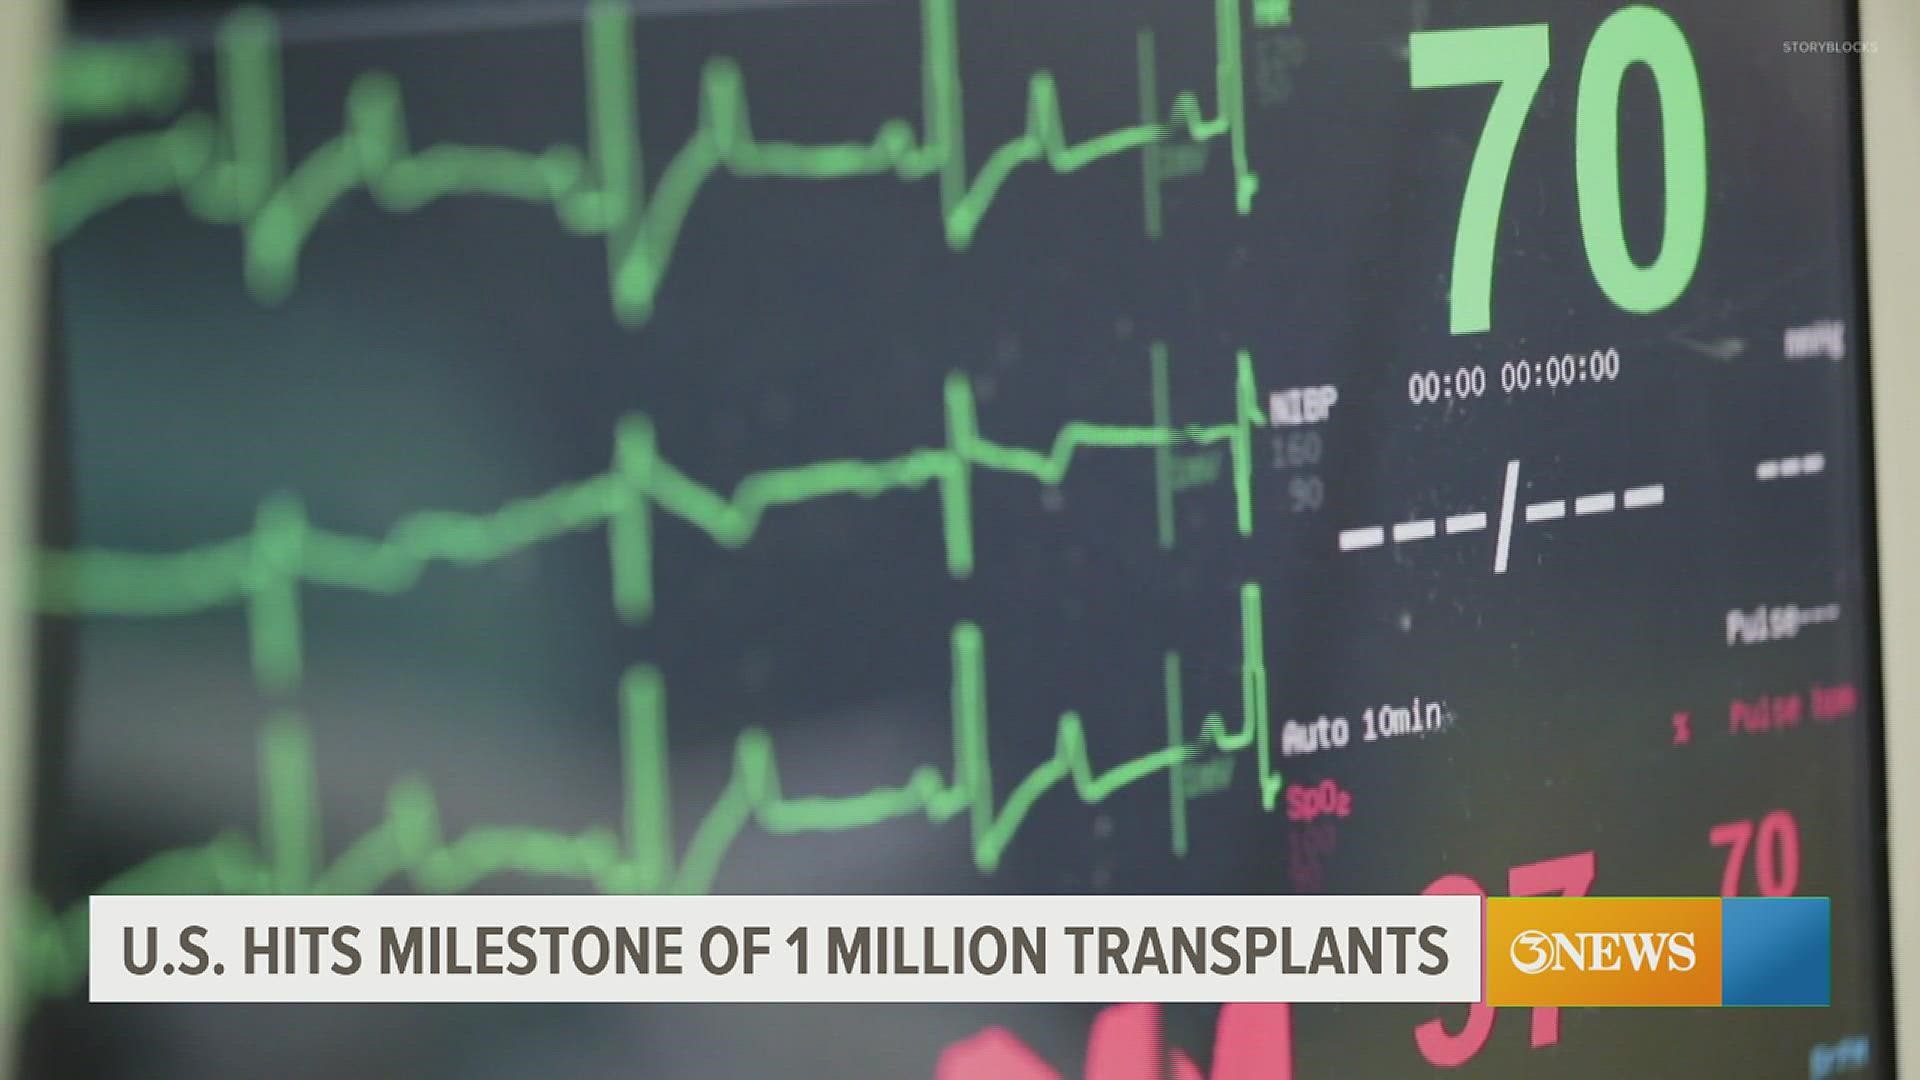 The millionth transplant was confirmed around 1 p.m. Sunday but we do not have any details on the patient at this time.